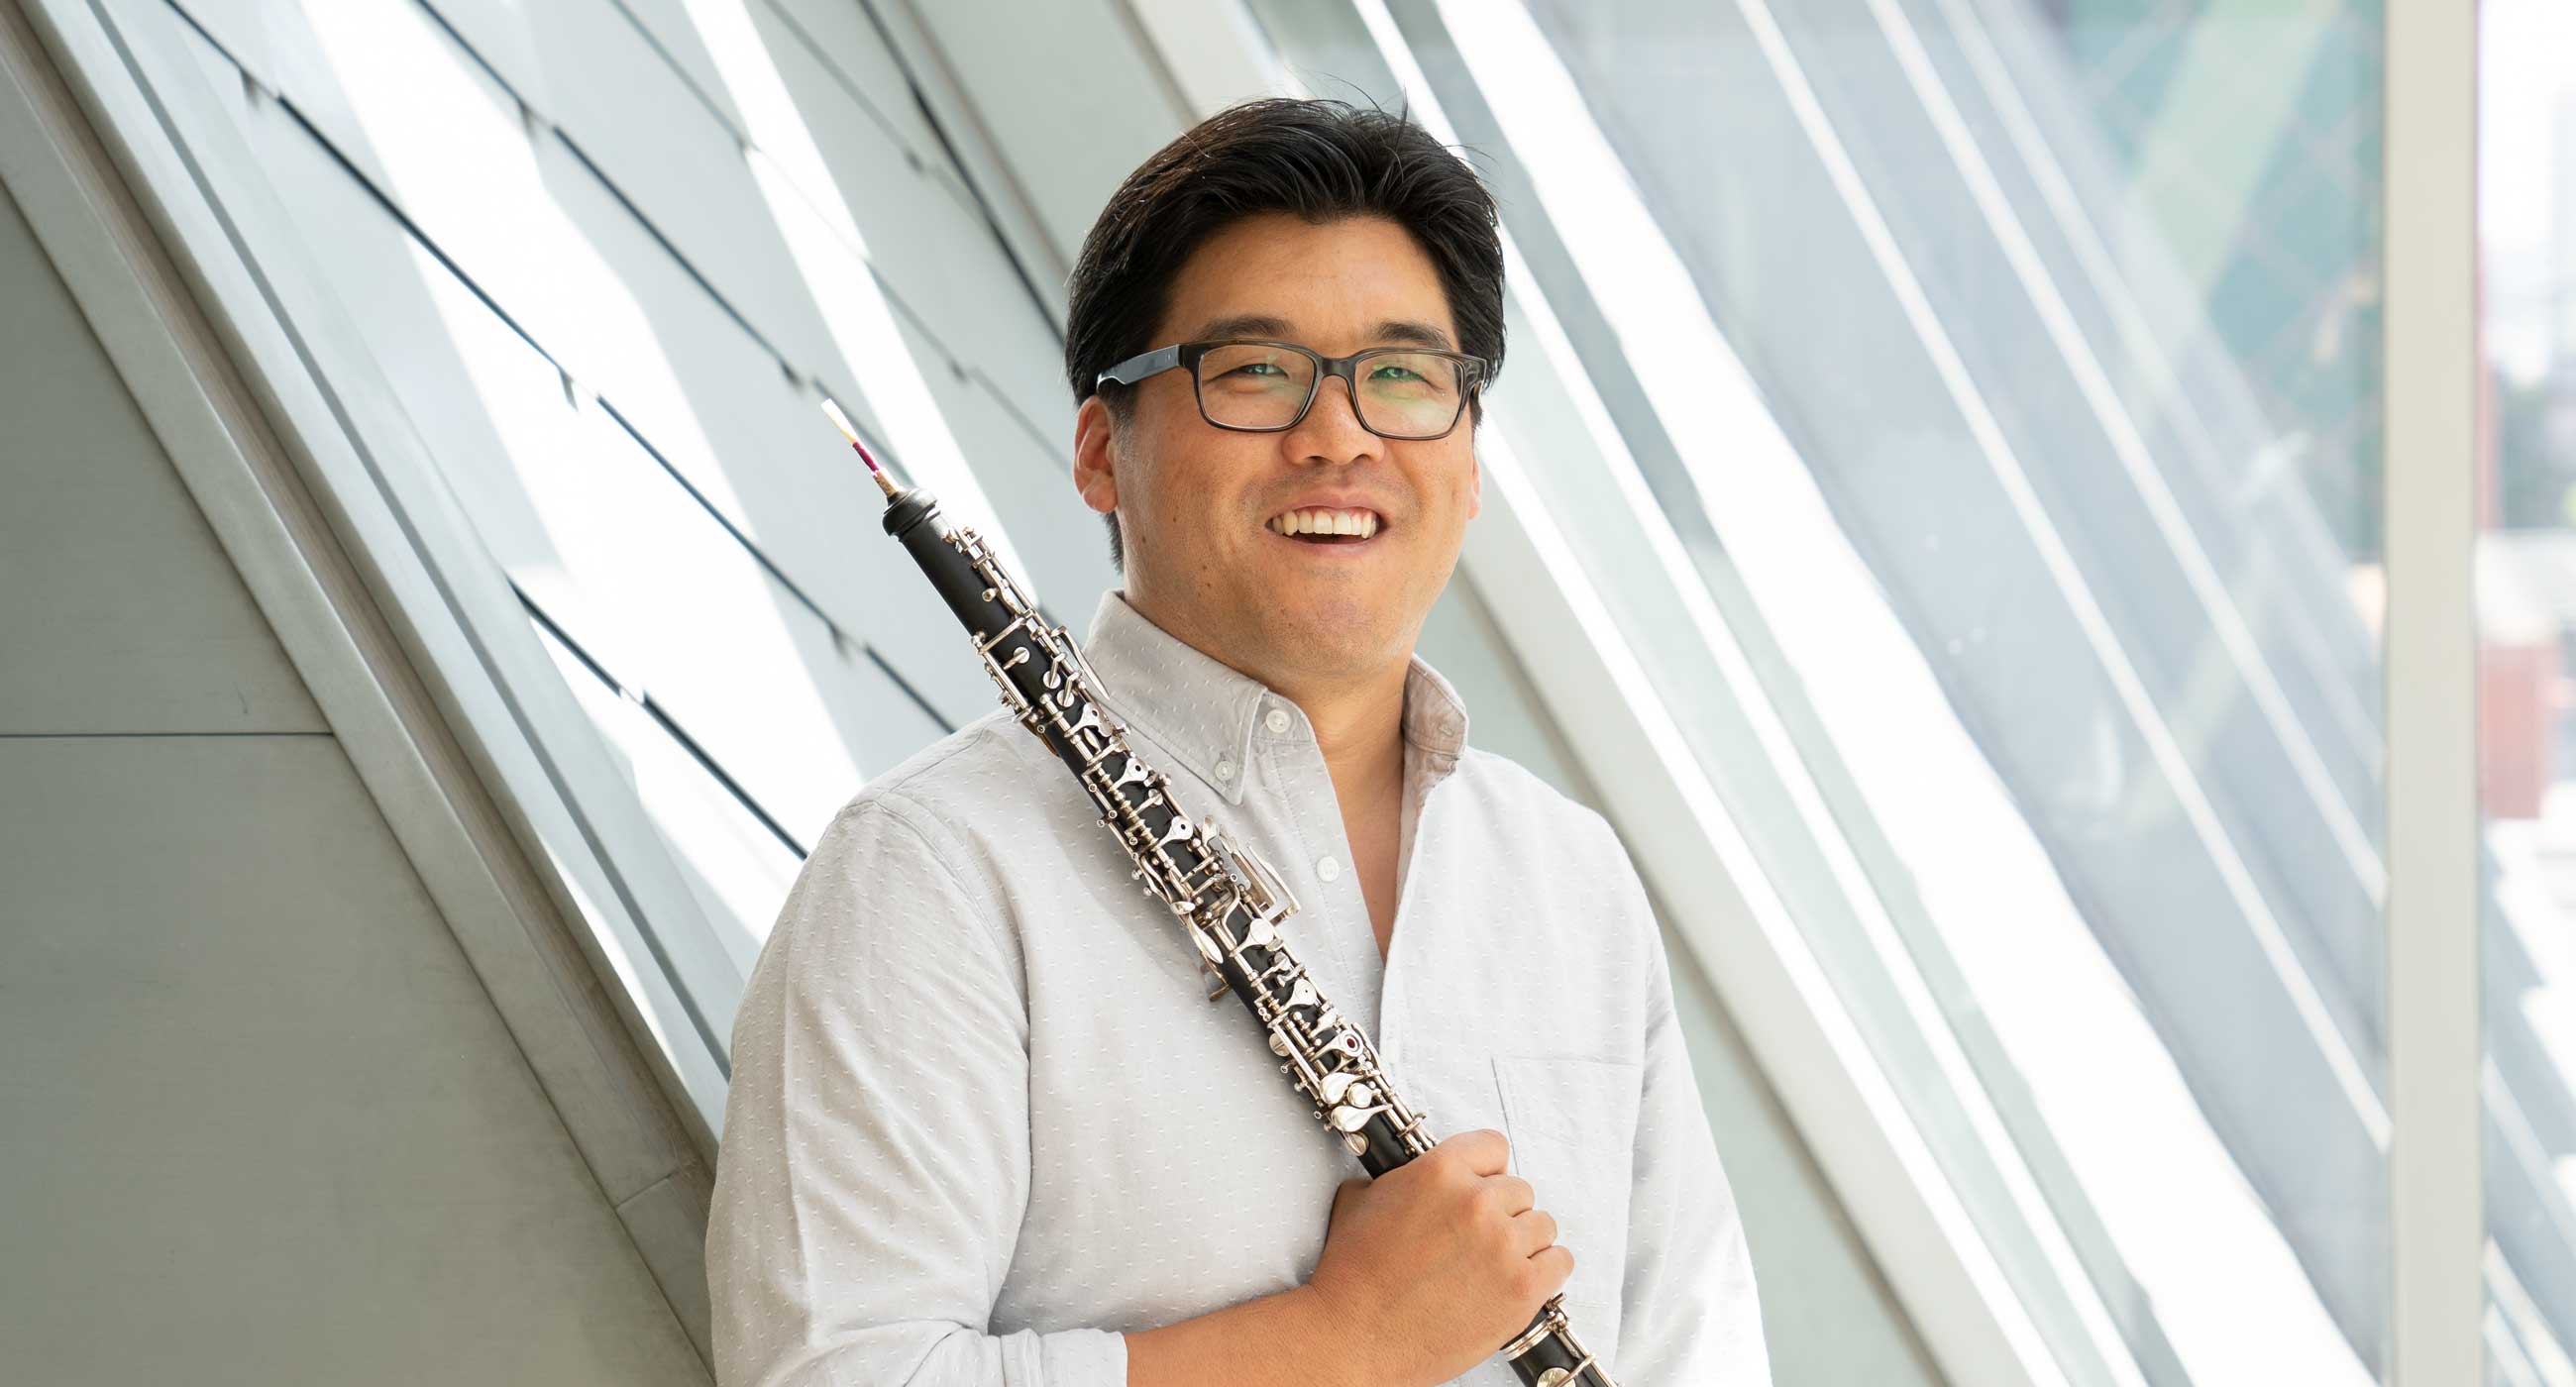 Ted Sugata holding an oboe and smiling in front of a window. He is wearing glasses.